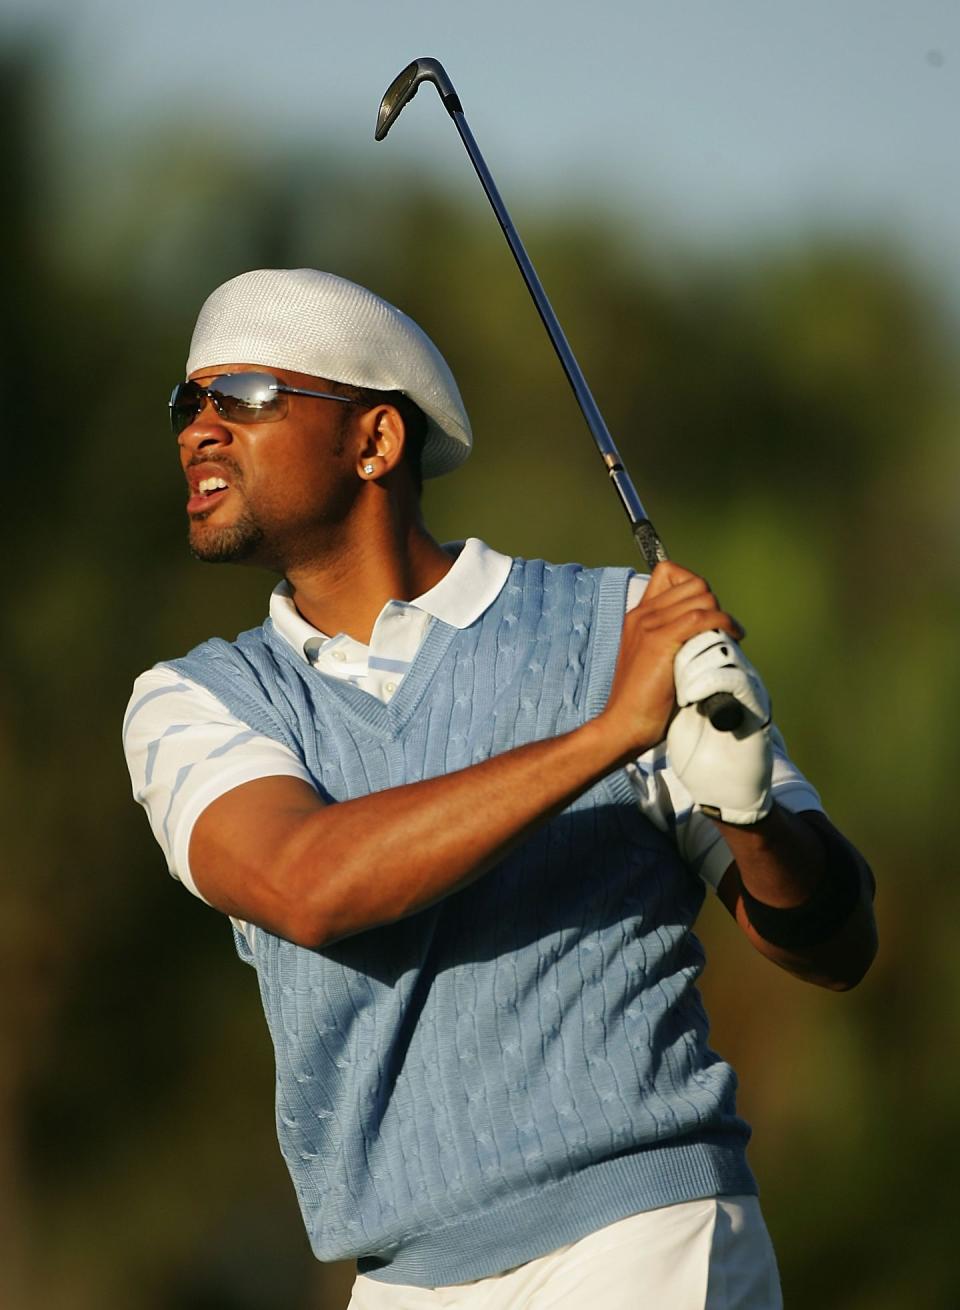 These 45 Photos of Celebrities Golfing Are the Ultimate Weekend Vibe